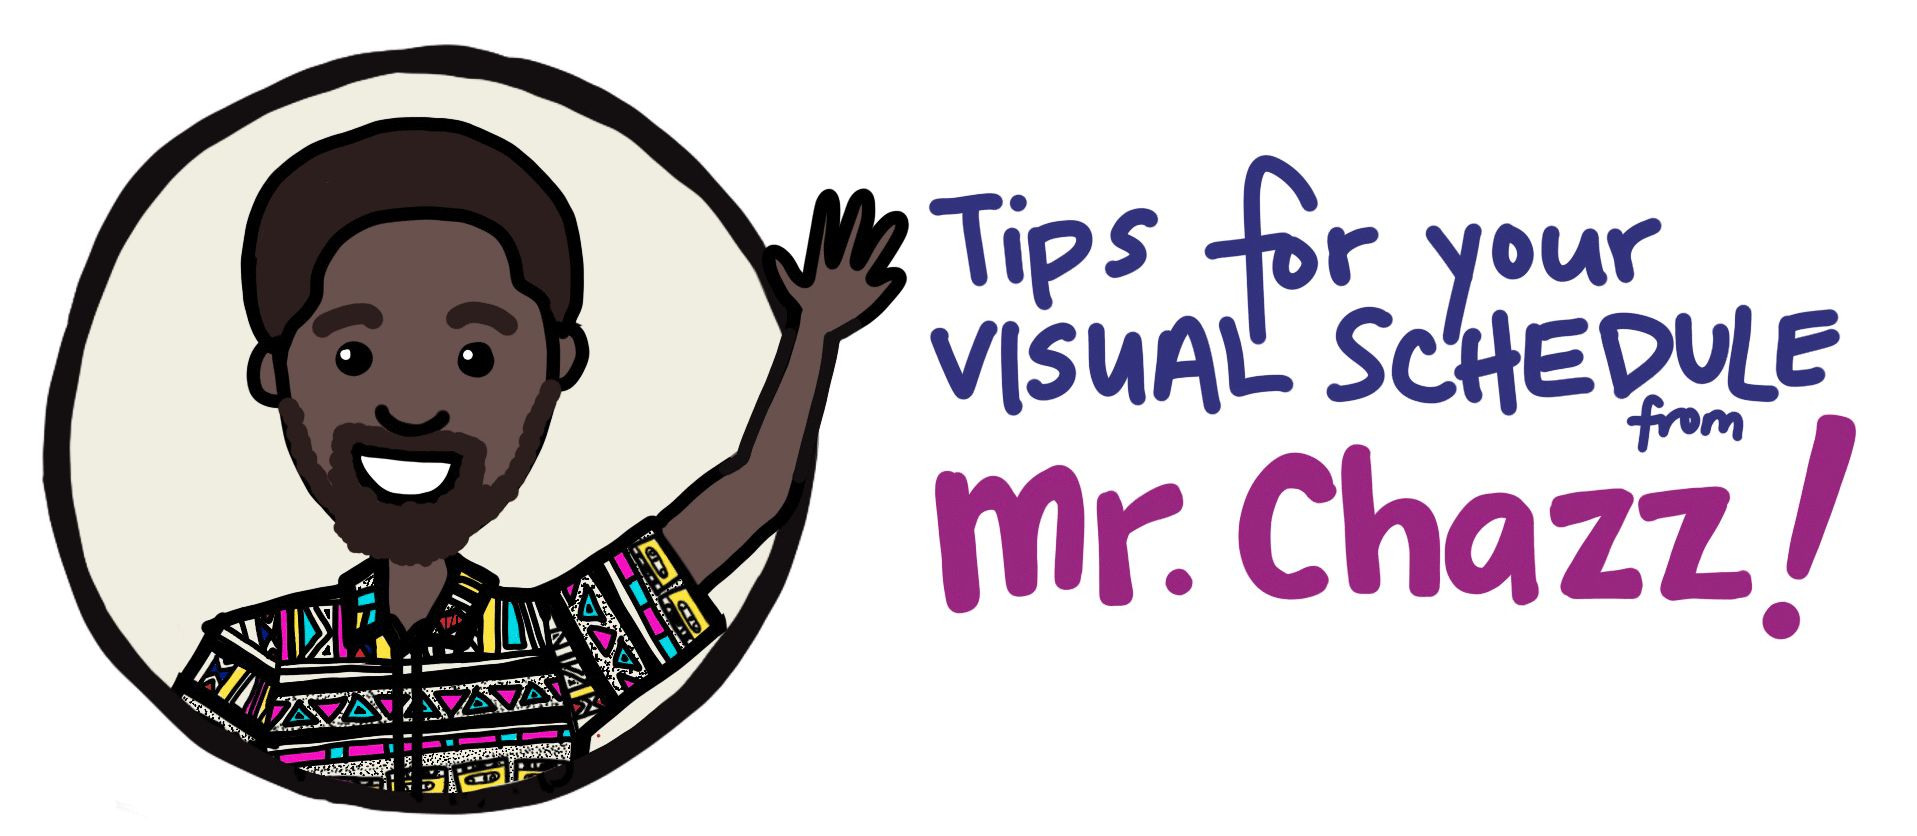 Tips for your visual schedule from Mr. Chazz